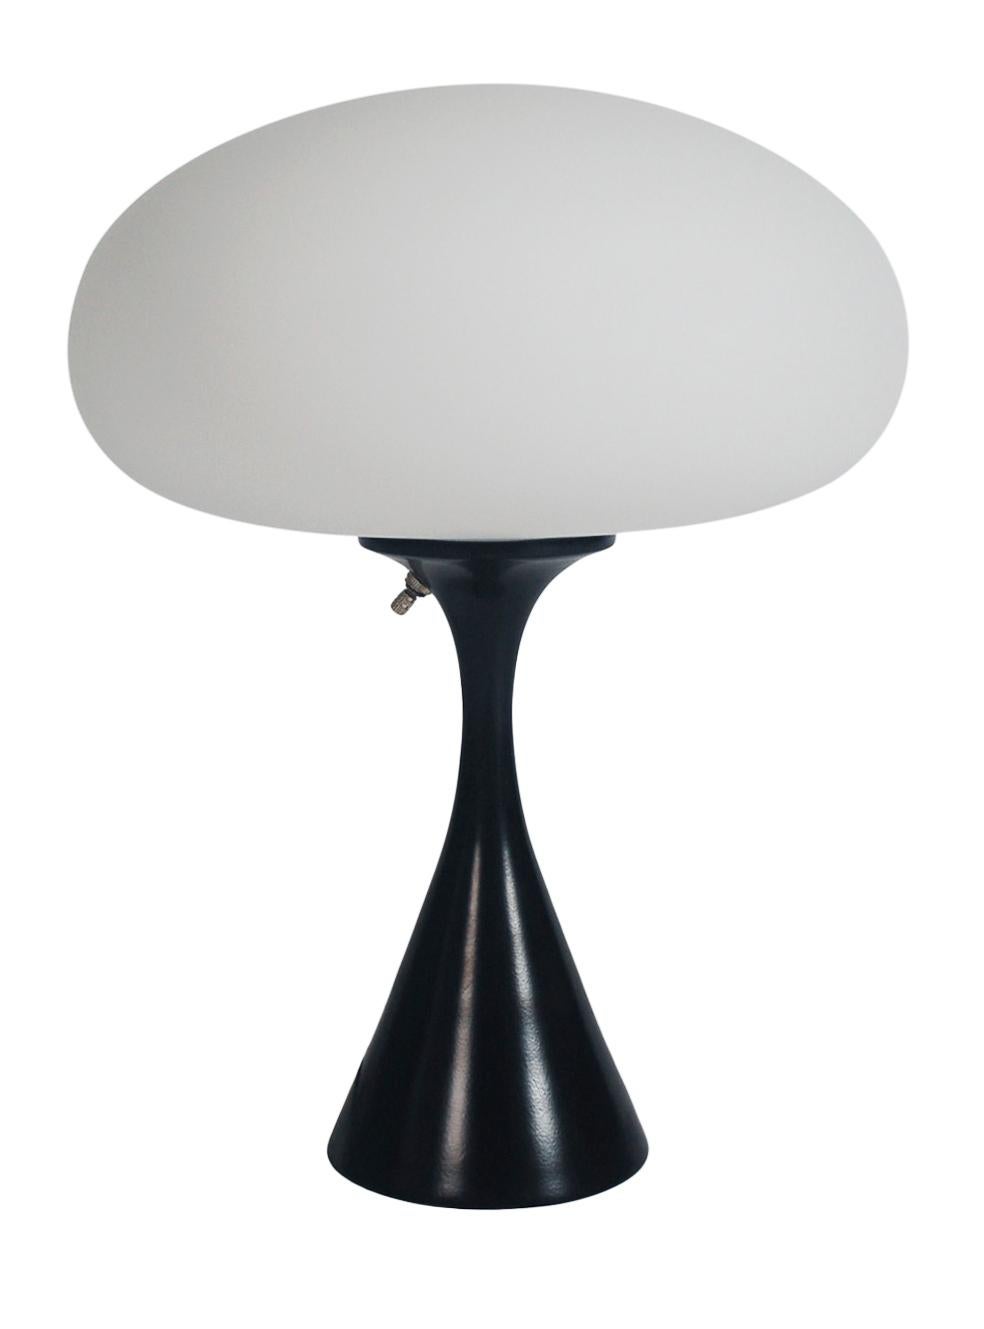 A handsome table lamp in a conical mushroom form after Laurel lamp Company. The lamp features a cast aluminum base with a black powder coat and a mouth blown frosted glass lamp shade.